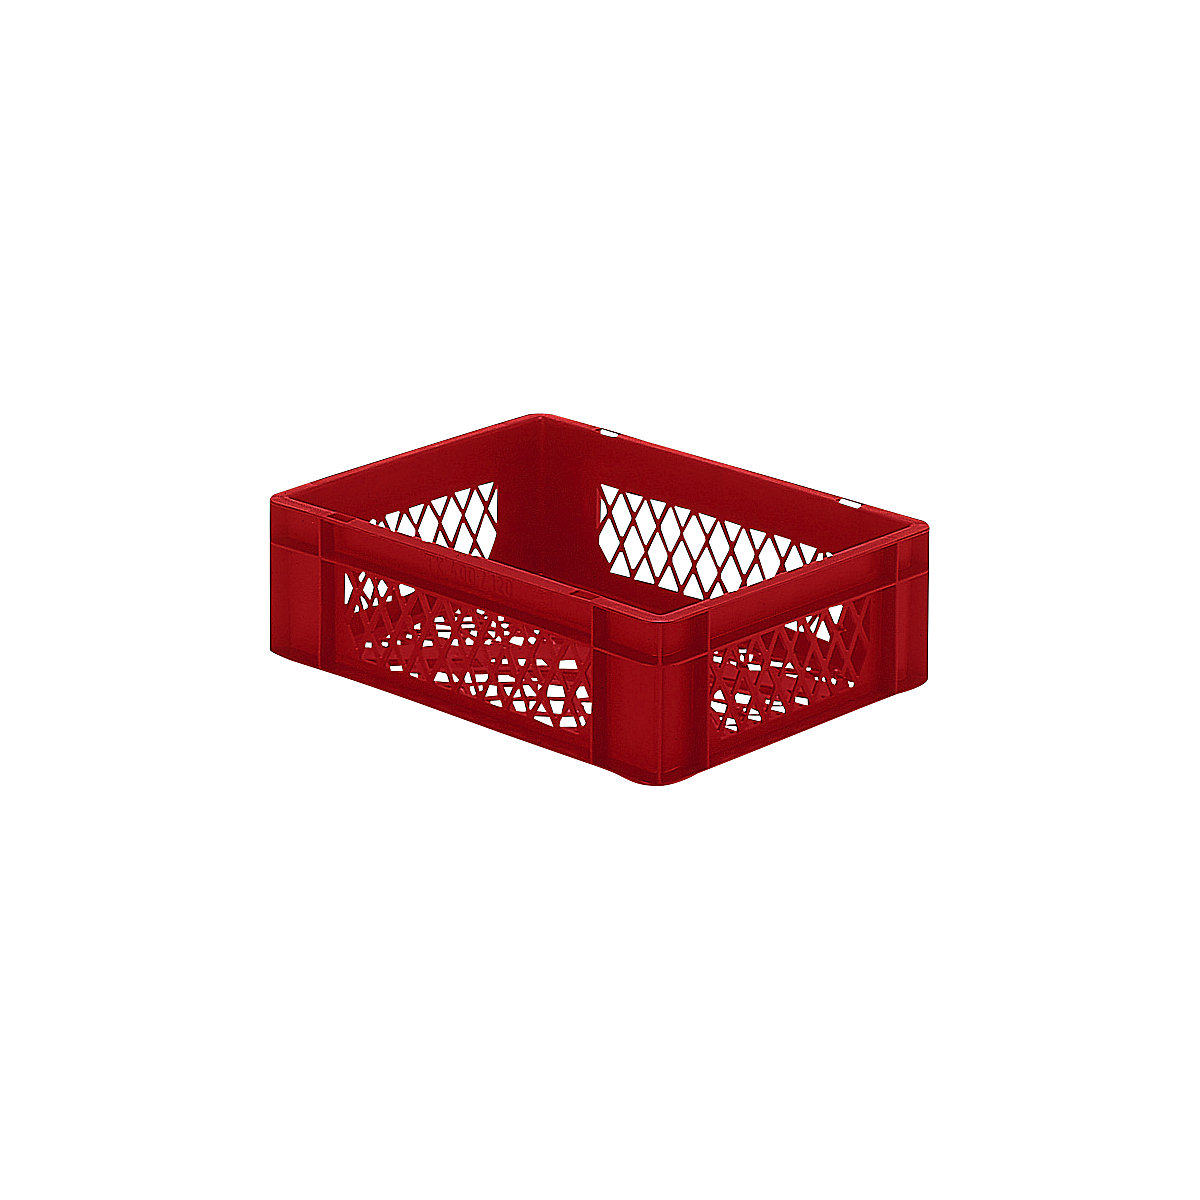 Euro stacking container, perforated walls and base, LxWxH 400 x 300 x 120 mm, red, pack of 5